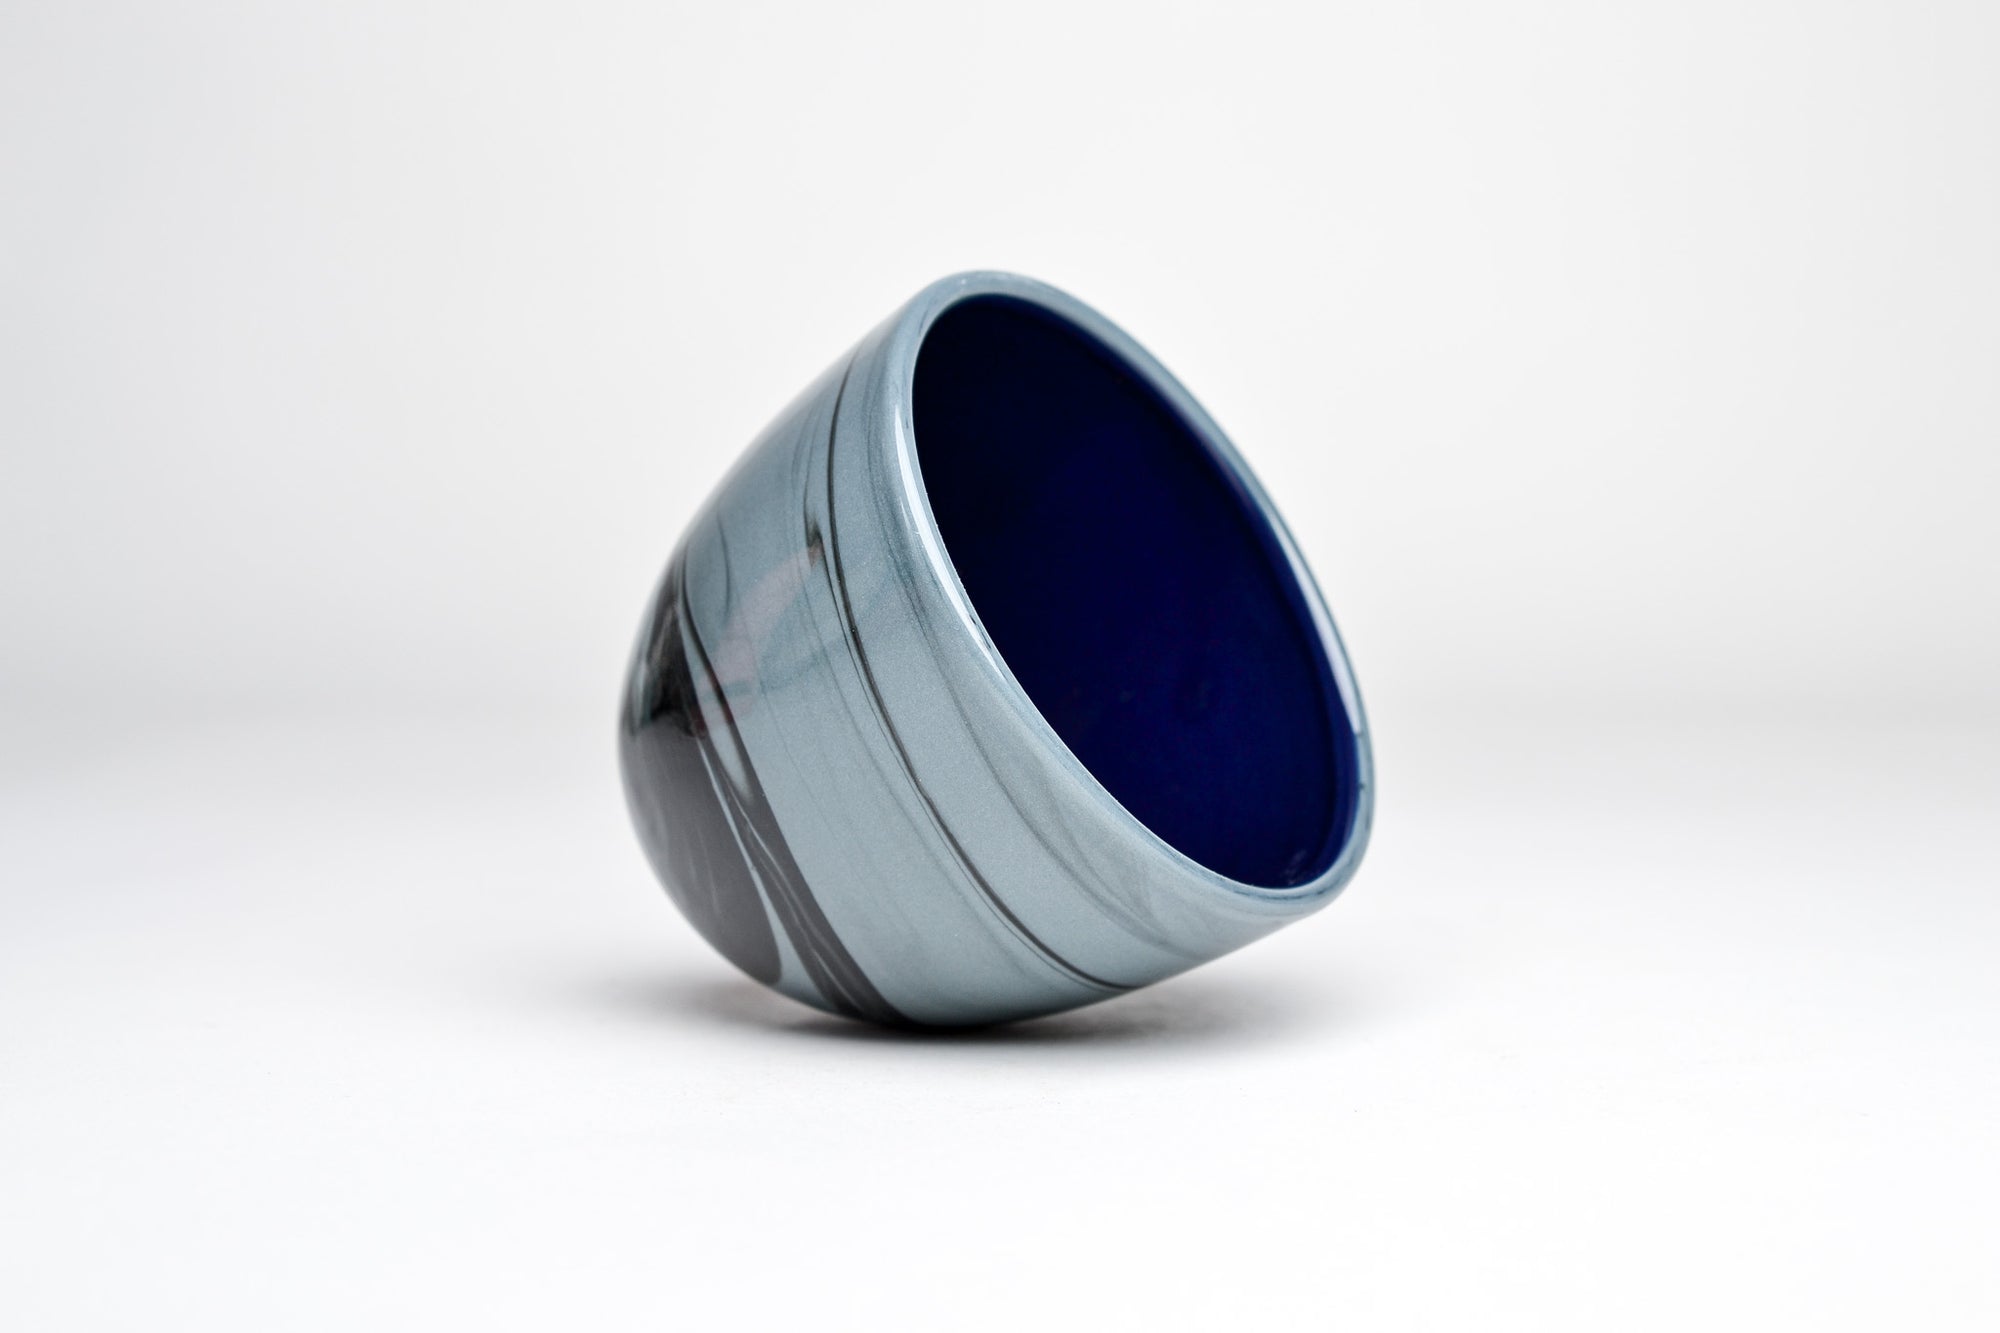 Smoke cup, blue gray and black - glossy version